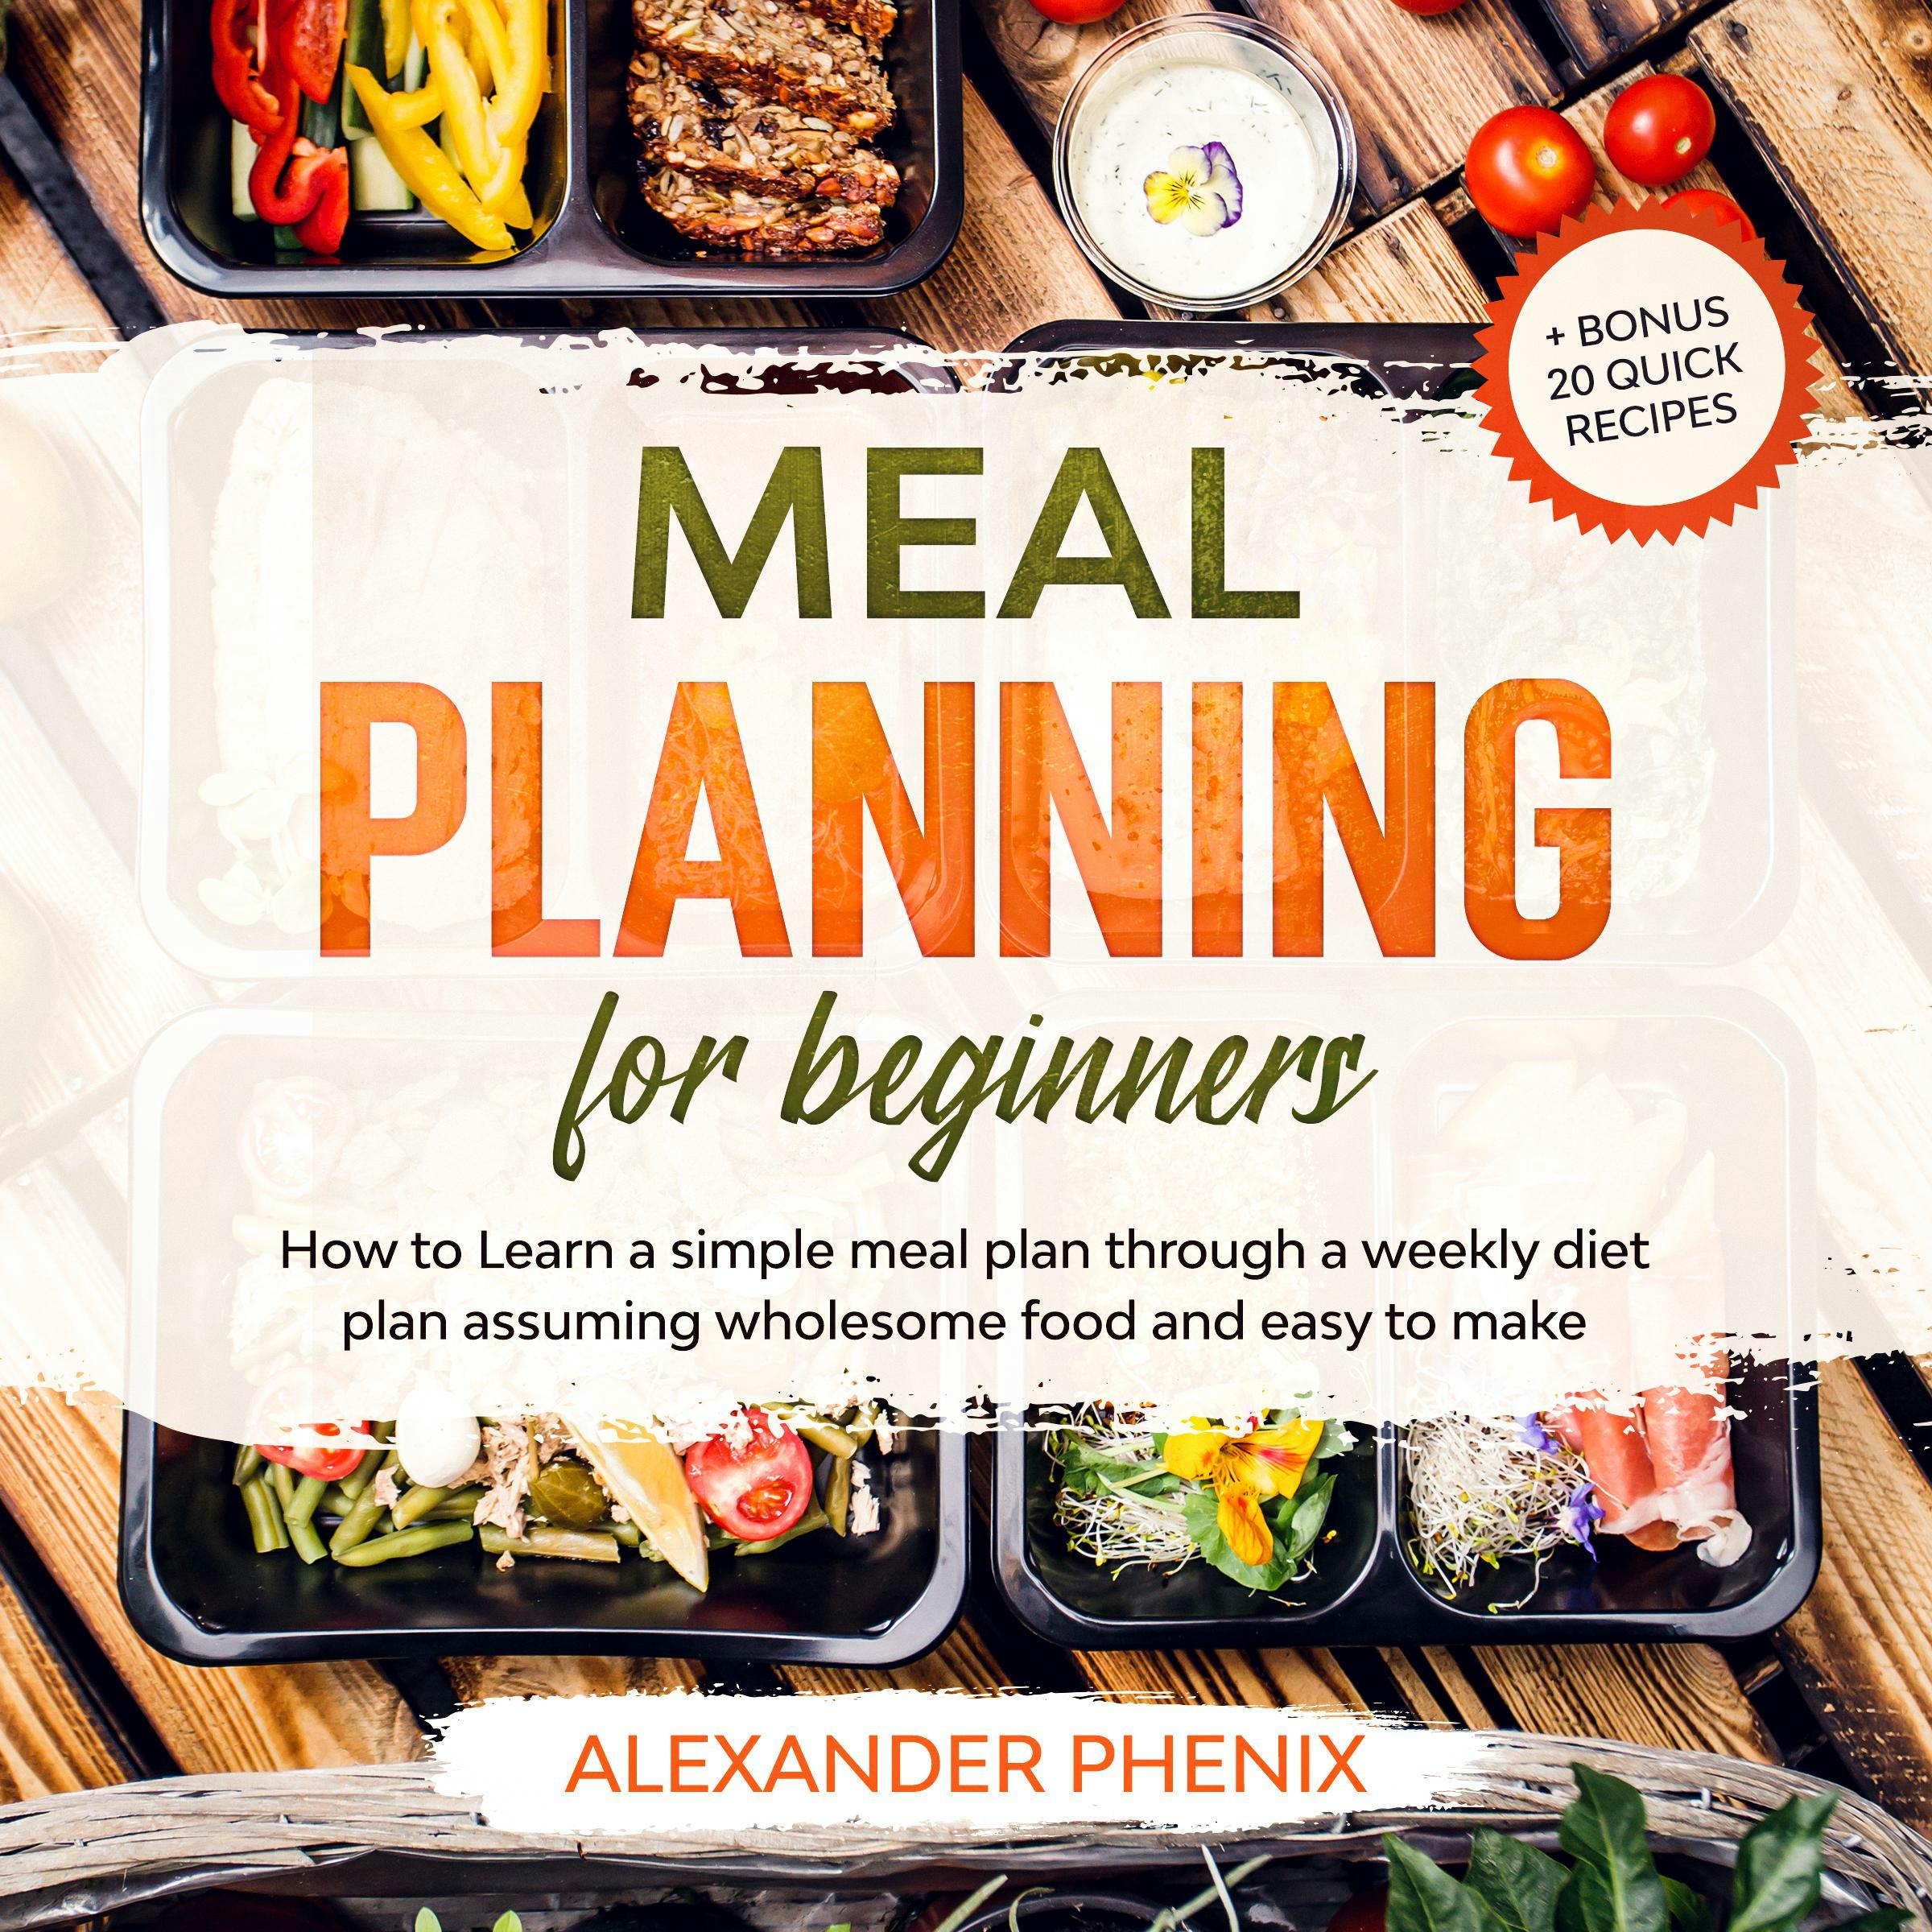 Meal planning for Beginners: How to Learn a simple meal plan through a weekly diet plan assuming wholesome food and easy to make + bonus 20 quick recipes - Alexander Phenix